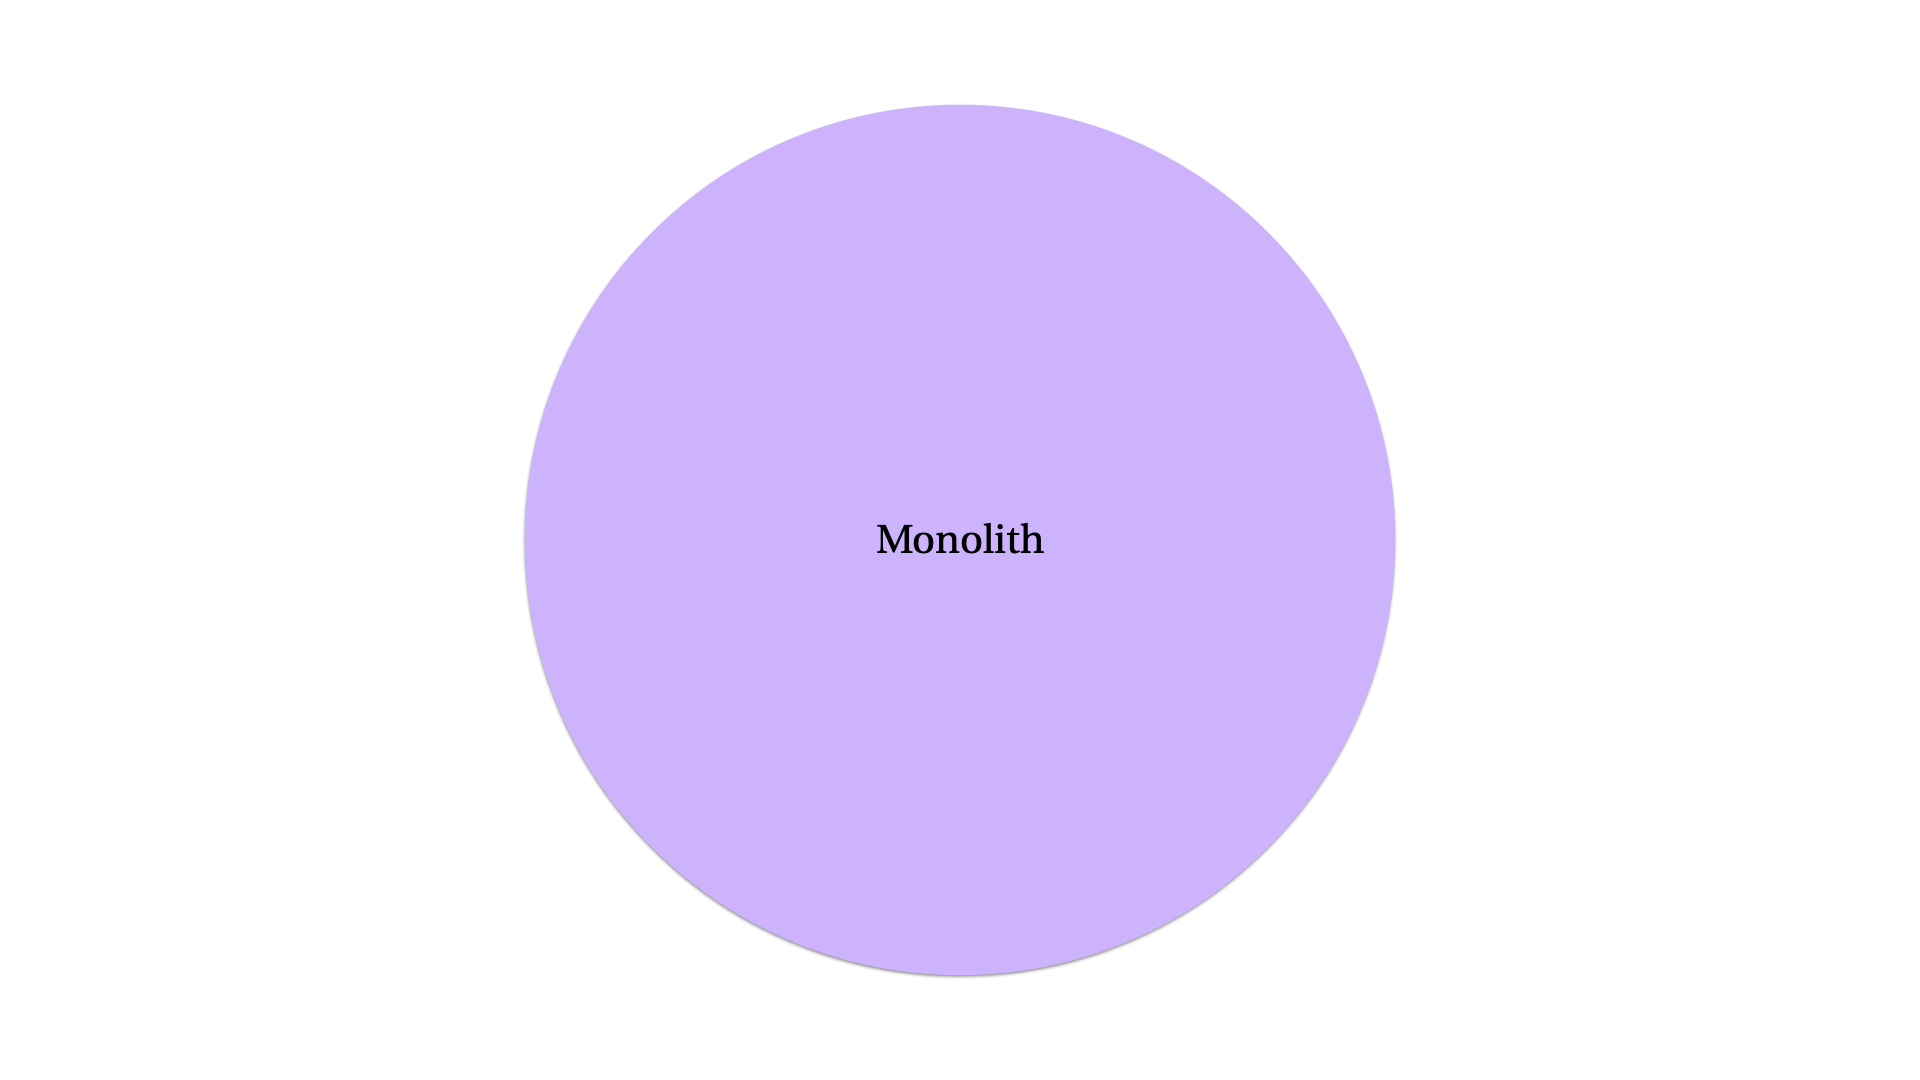 a circle with the word “monolith” on it